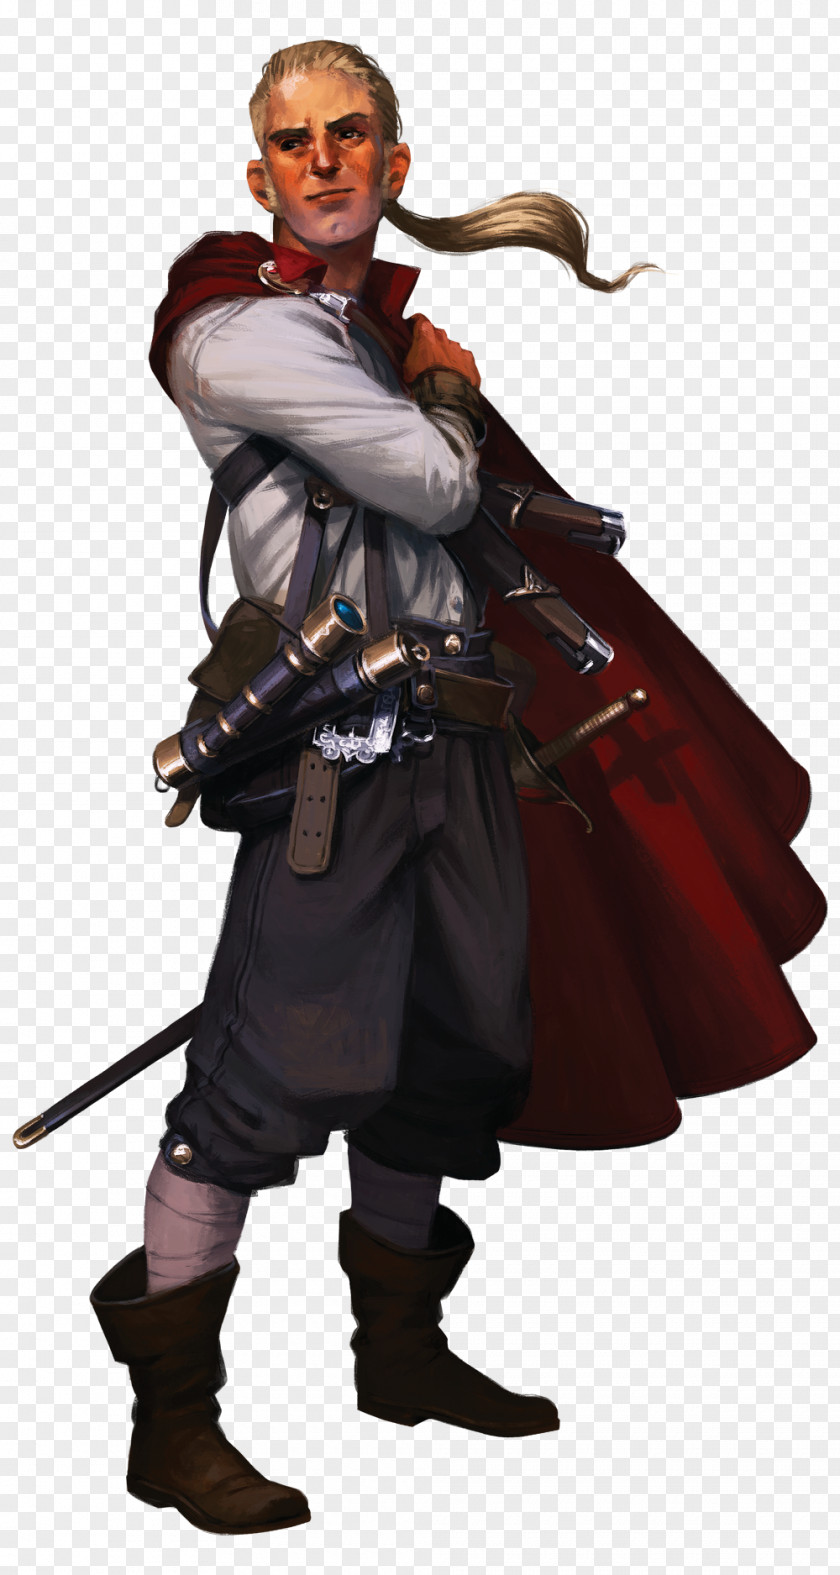 Pirate Collection Design John Wick 7th Sea Pathfinder Roleplaying Game Dungeons & Dragons Warhammer Fantasy Roleplay PNG